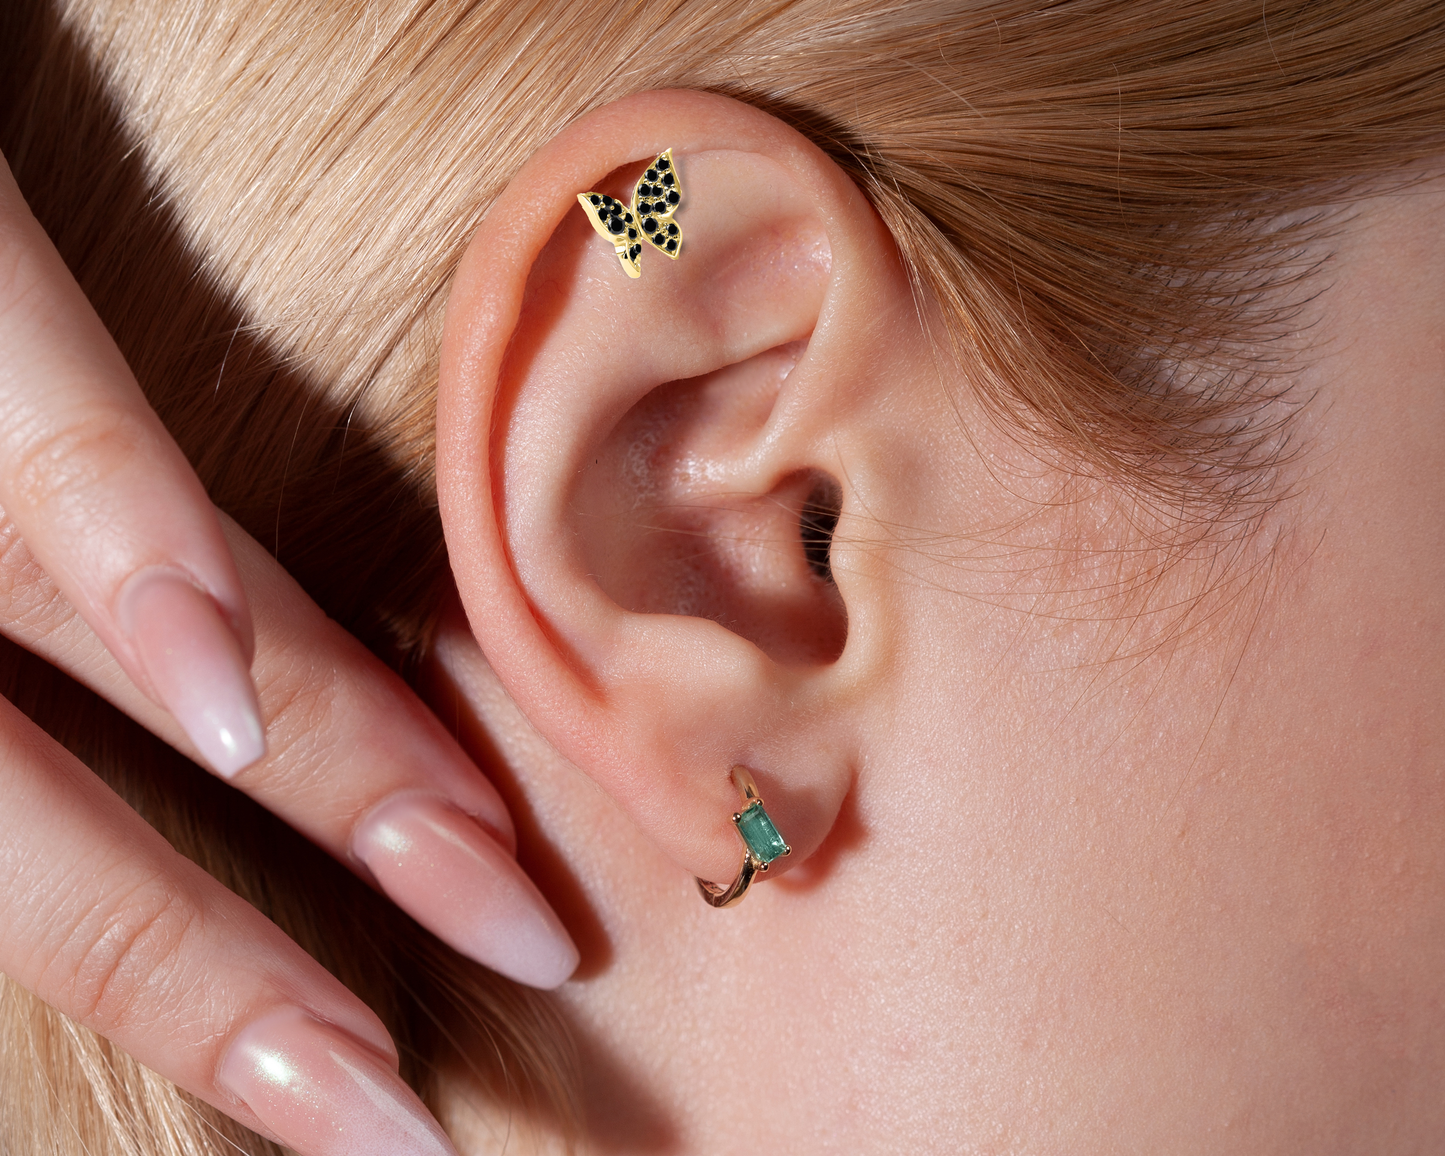 Butterfly Design Piercing with Black Diamond in 14K Yellow Solid Gold Tragus Piercing 8mm Bar Length 16G